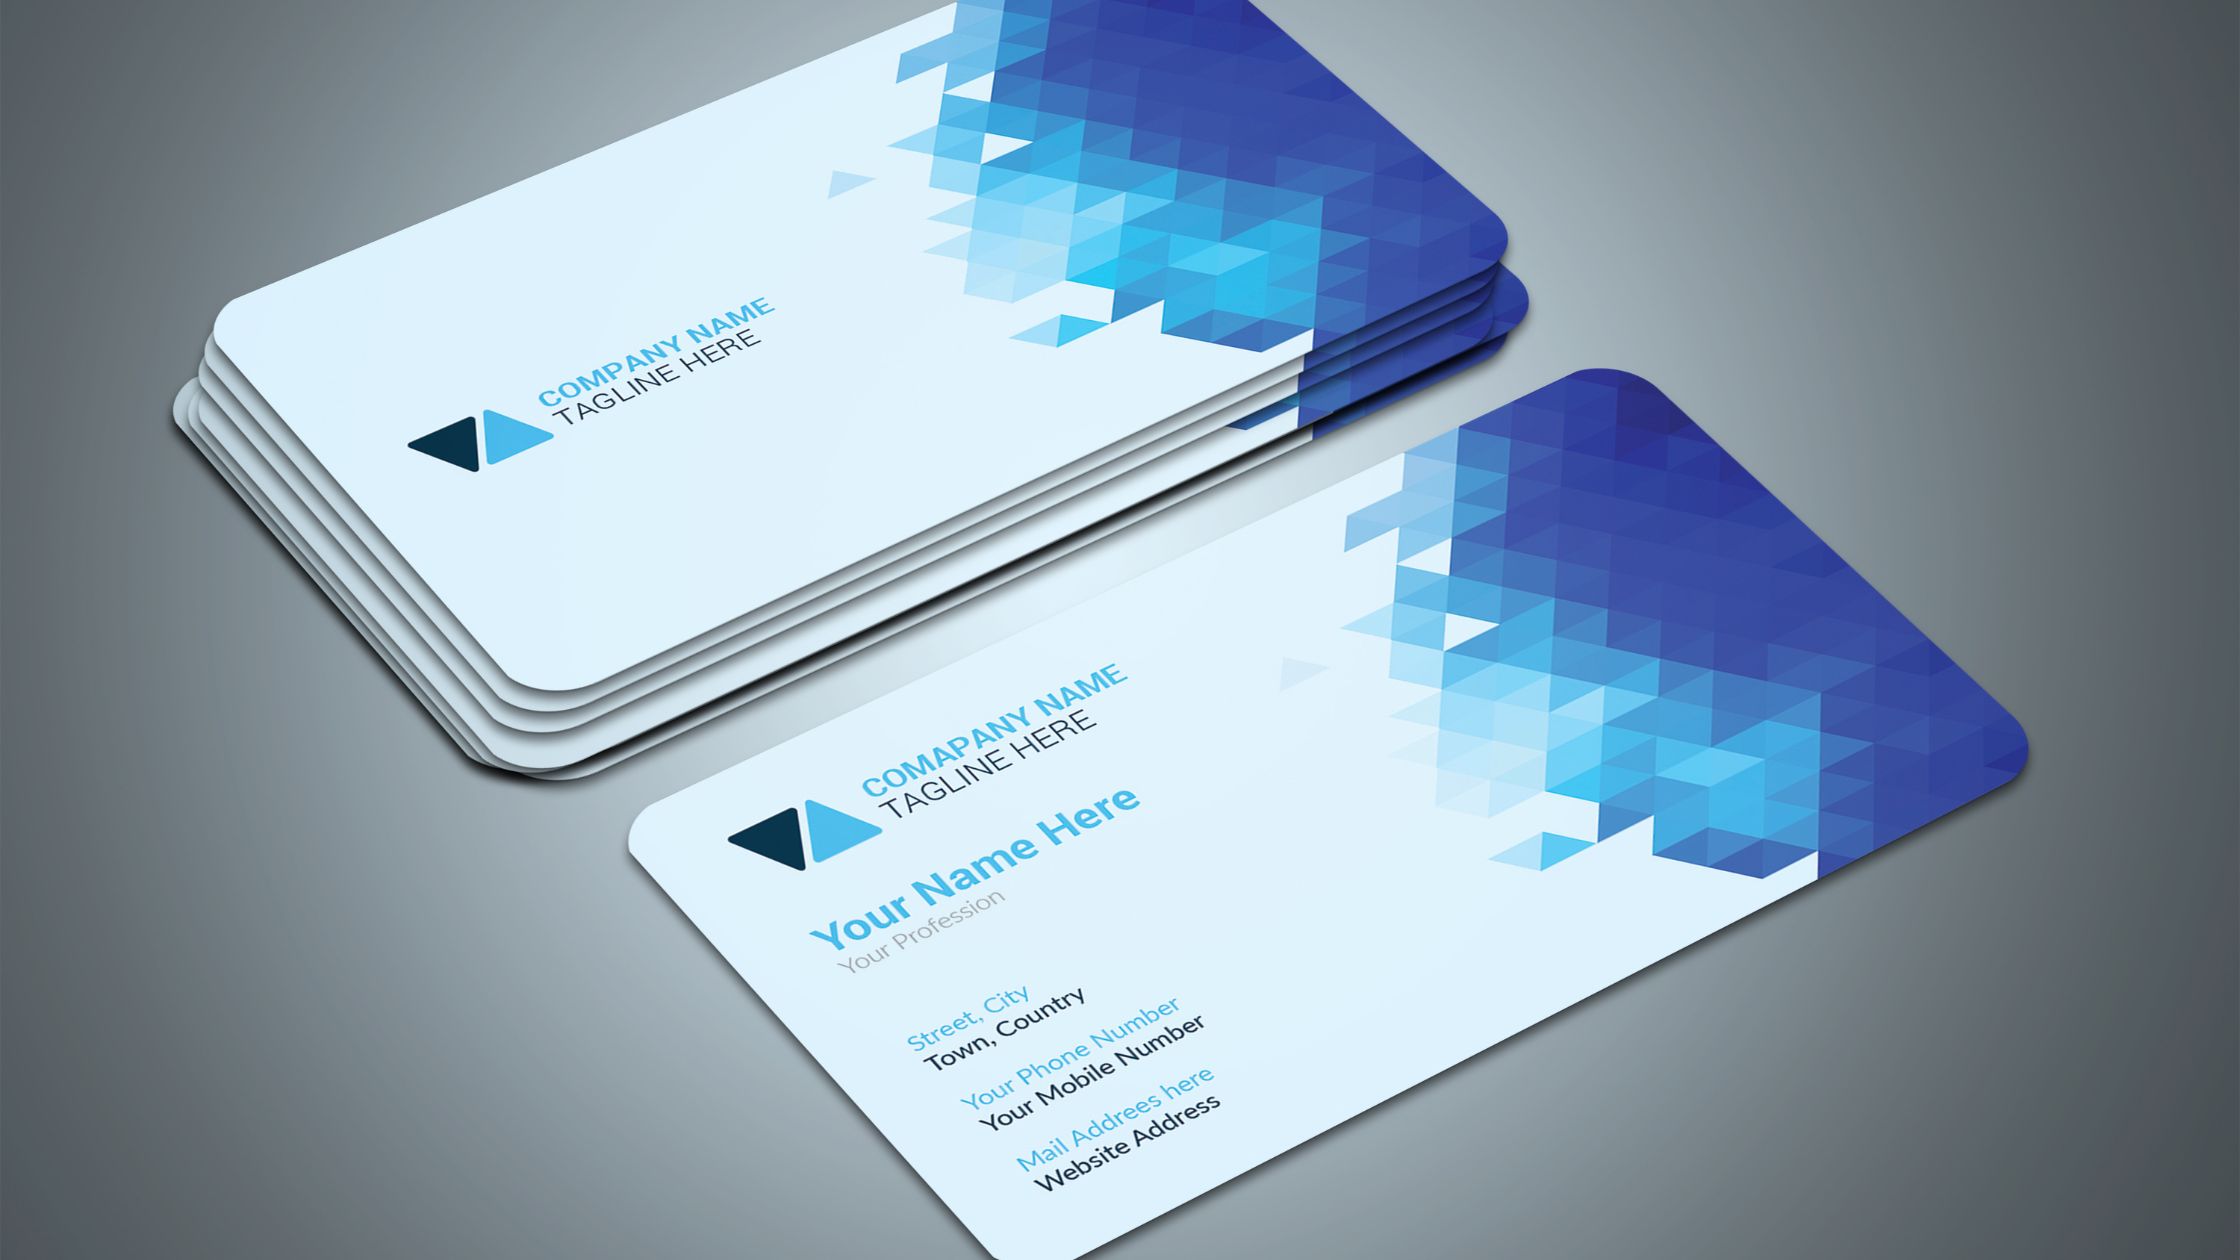 The Helping Biz - Business Cards Graphic